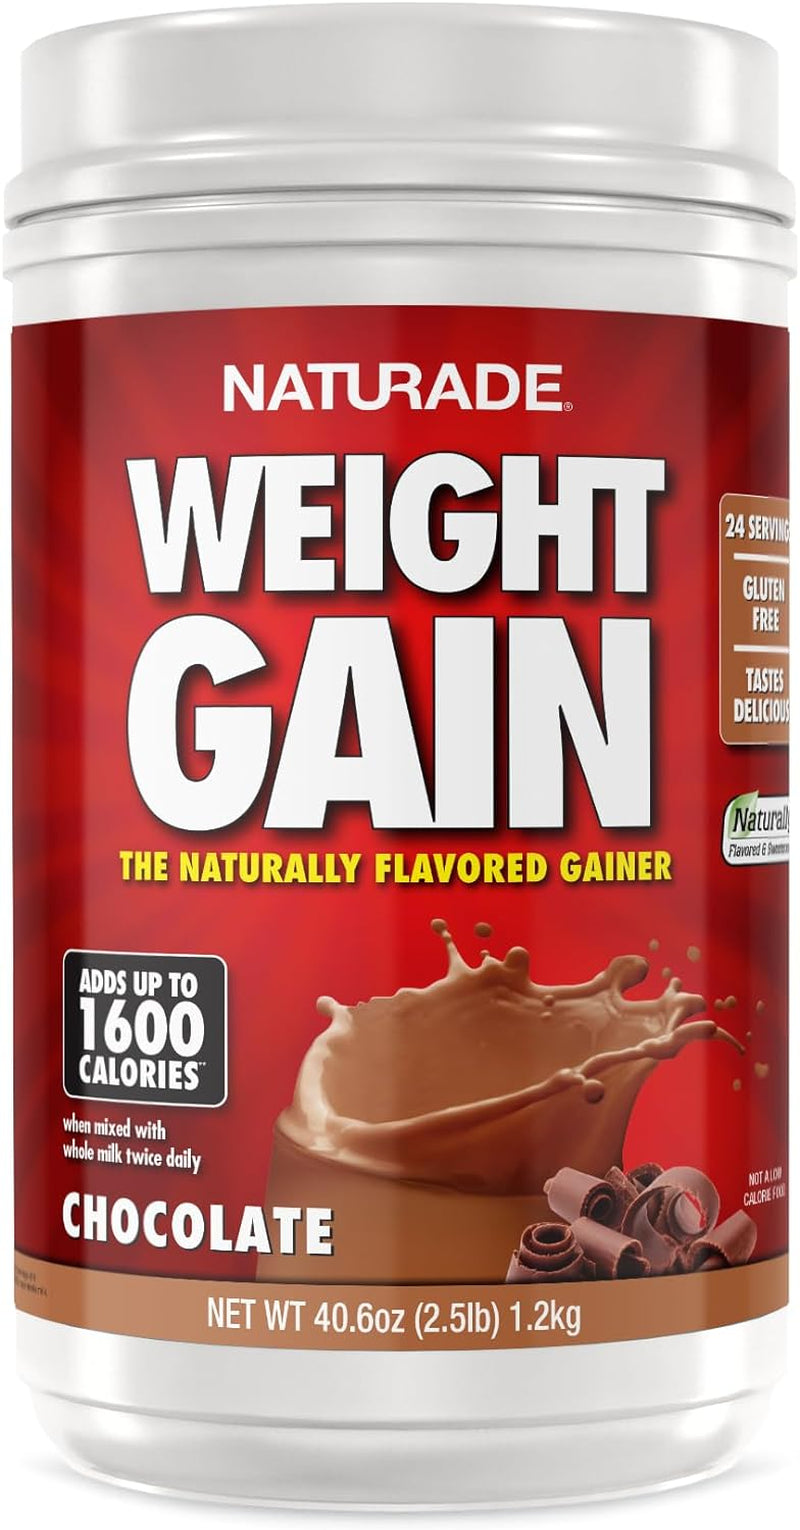 Naturade All Natural Weight Gain Drink Mix - Chocolate, 40.6 Ounce